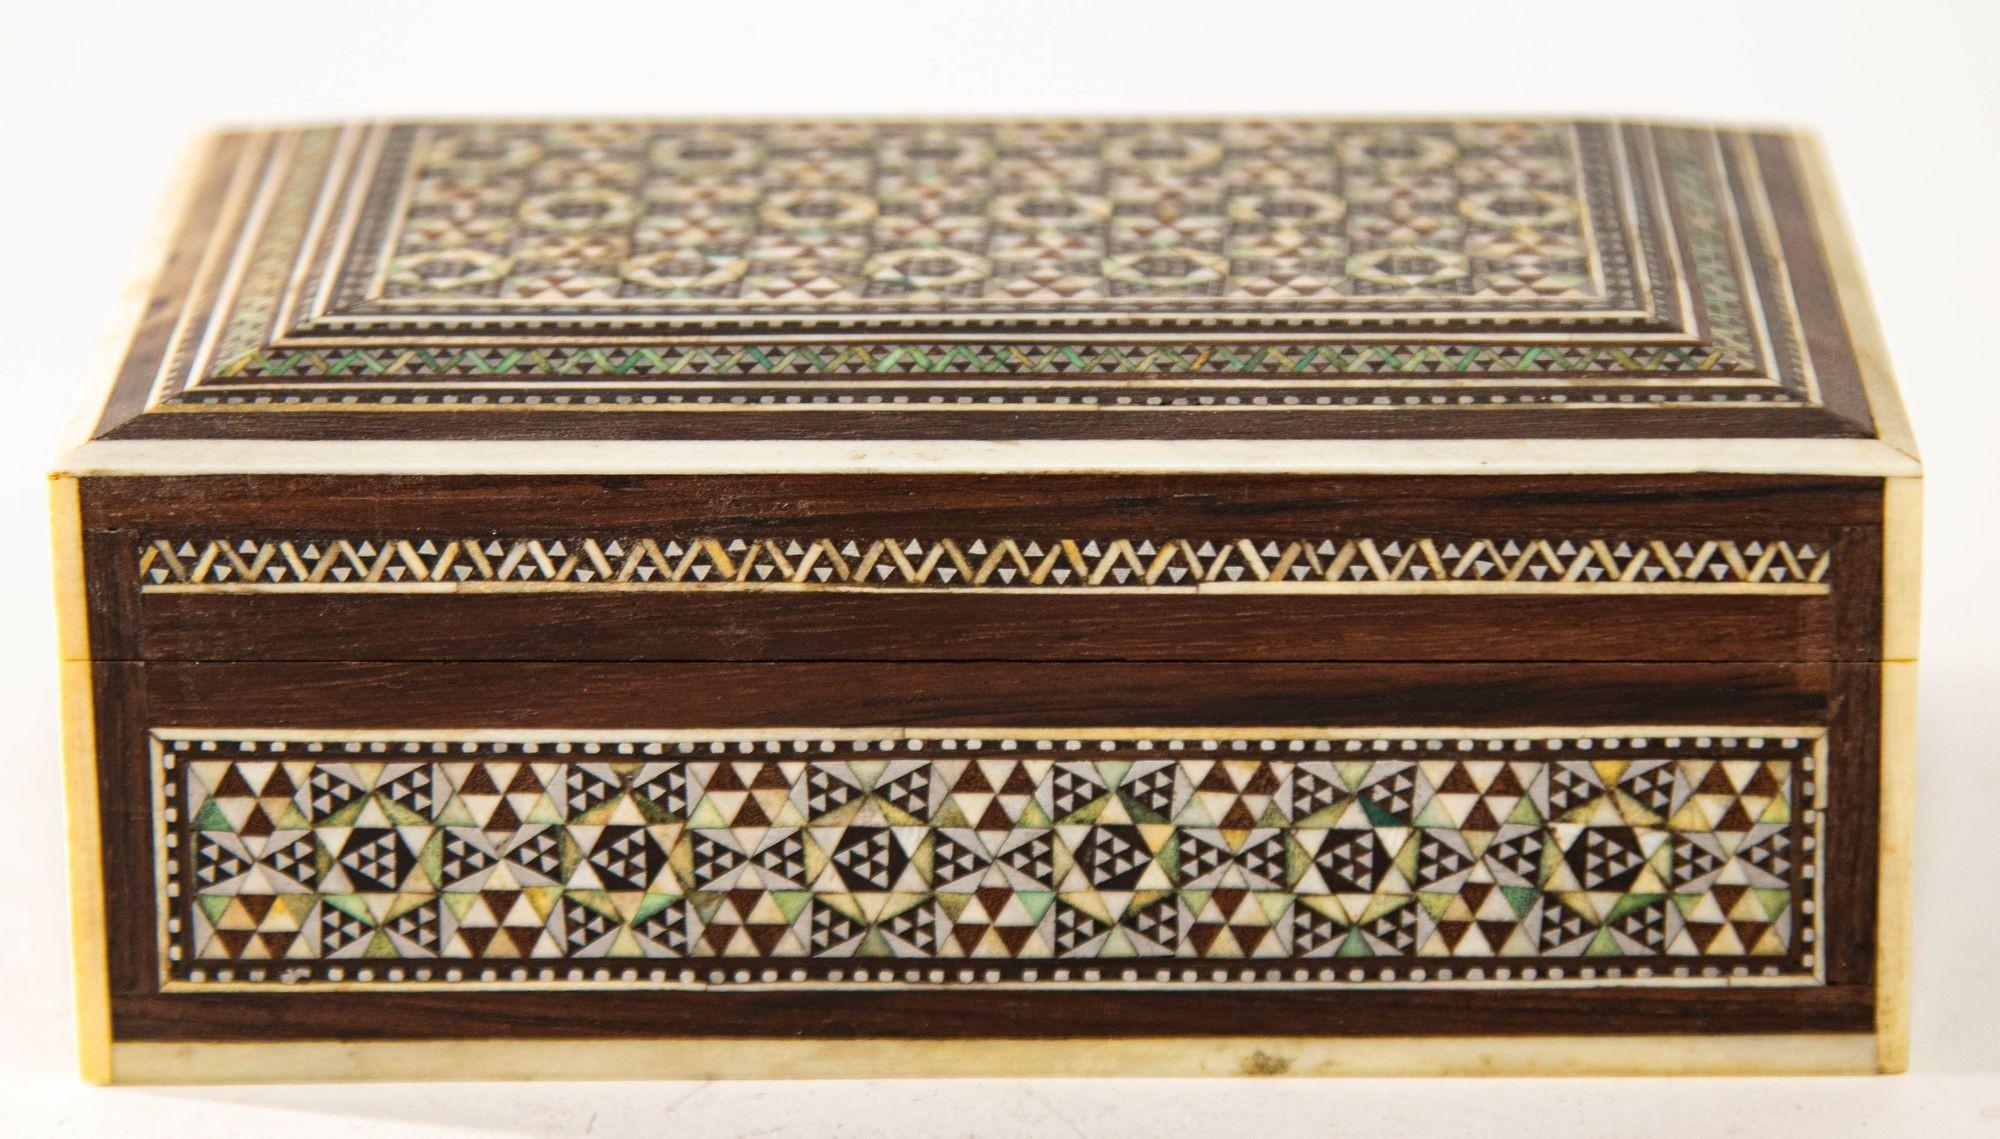 Moorish 1940s Mother of Pearl Inlaid Decorative Middle Eastern Islamic Box For Sale